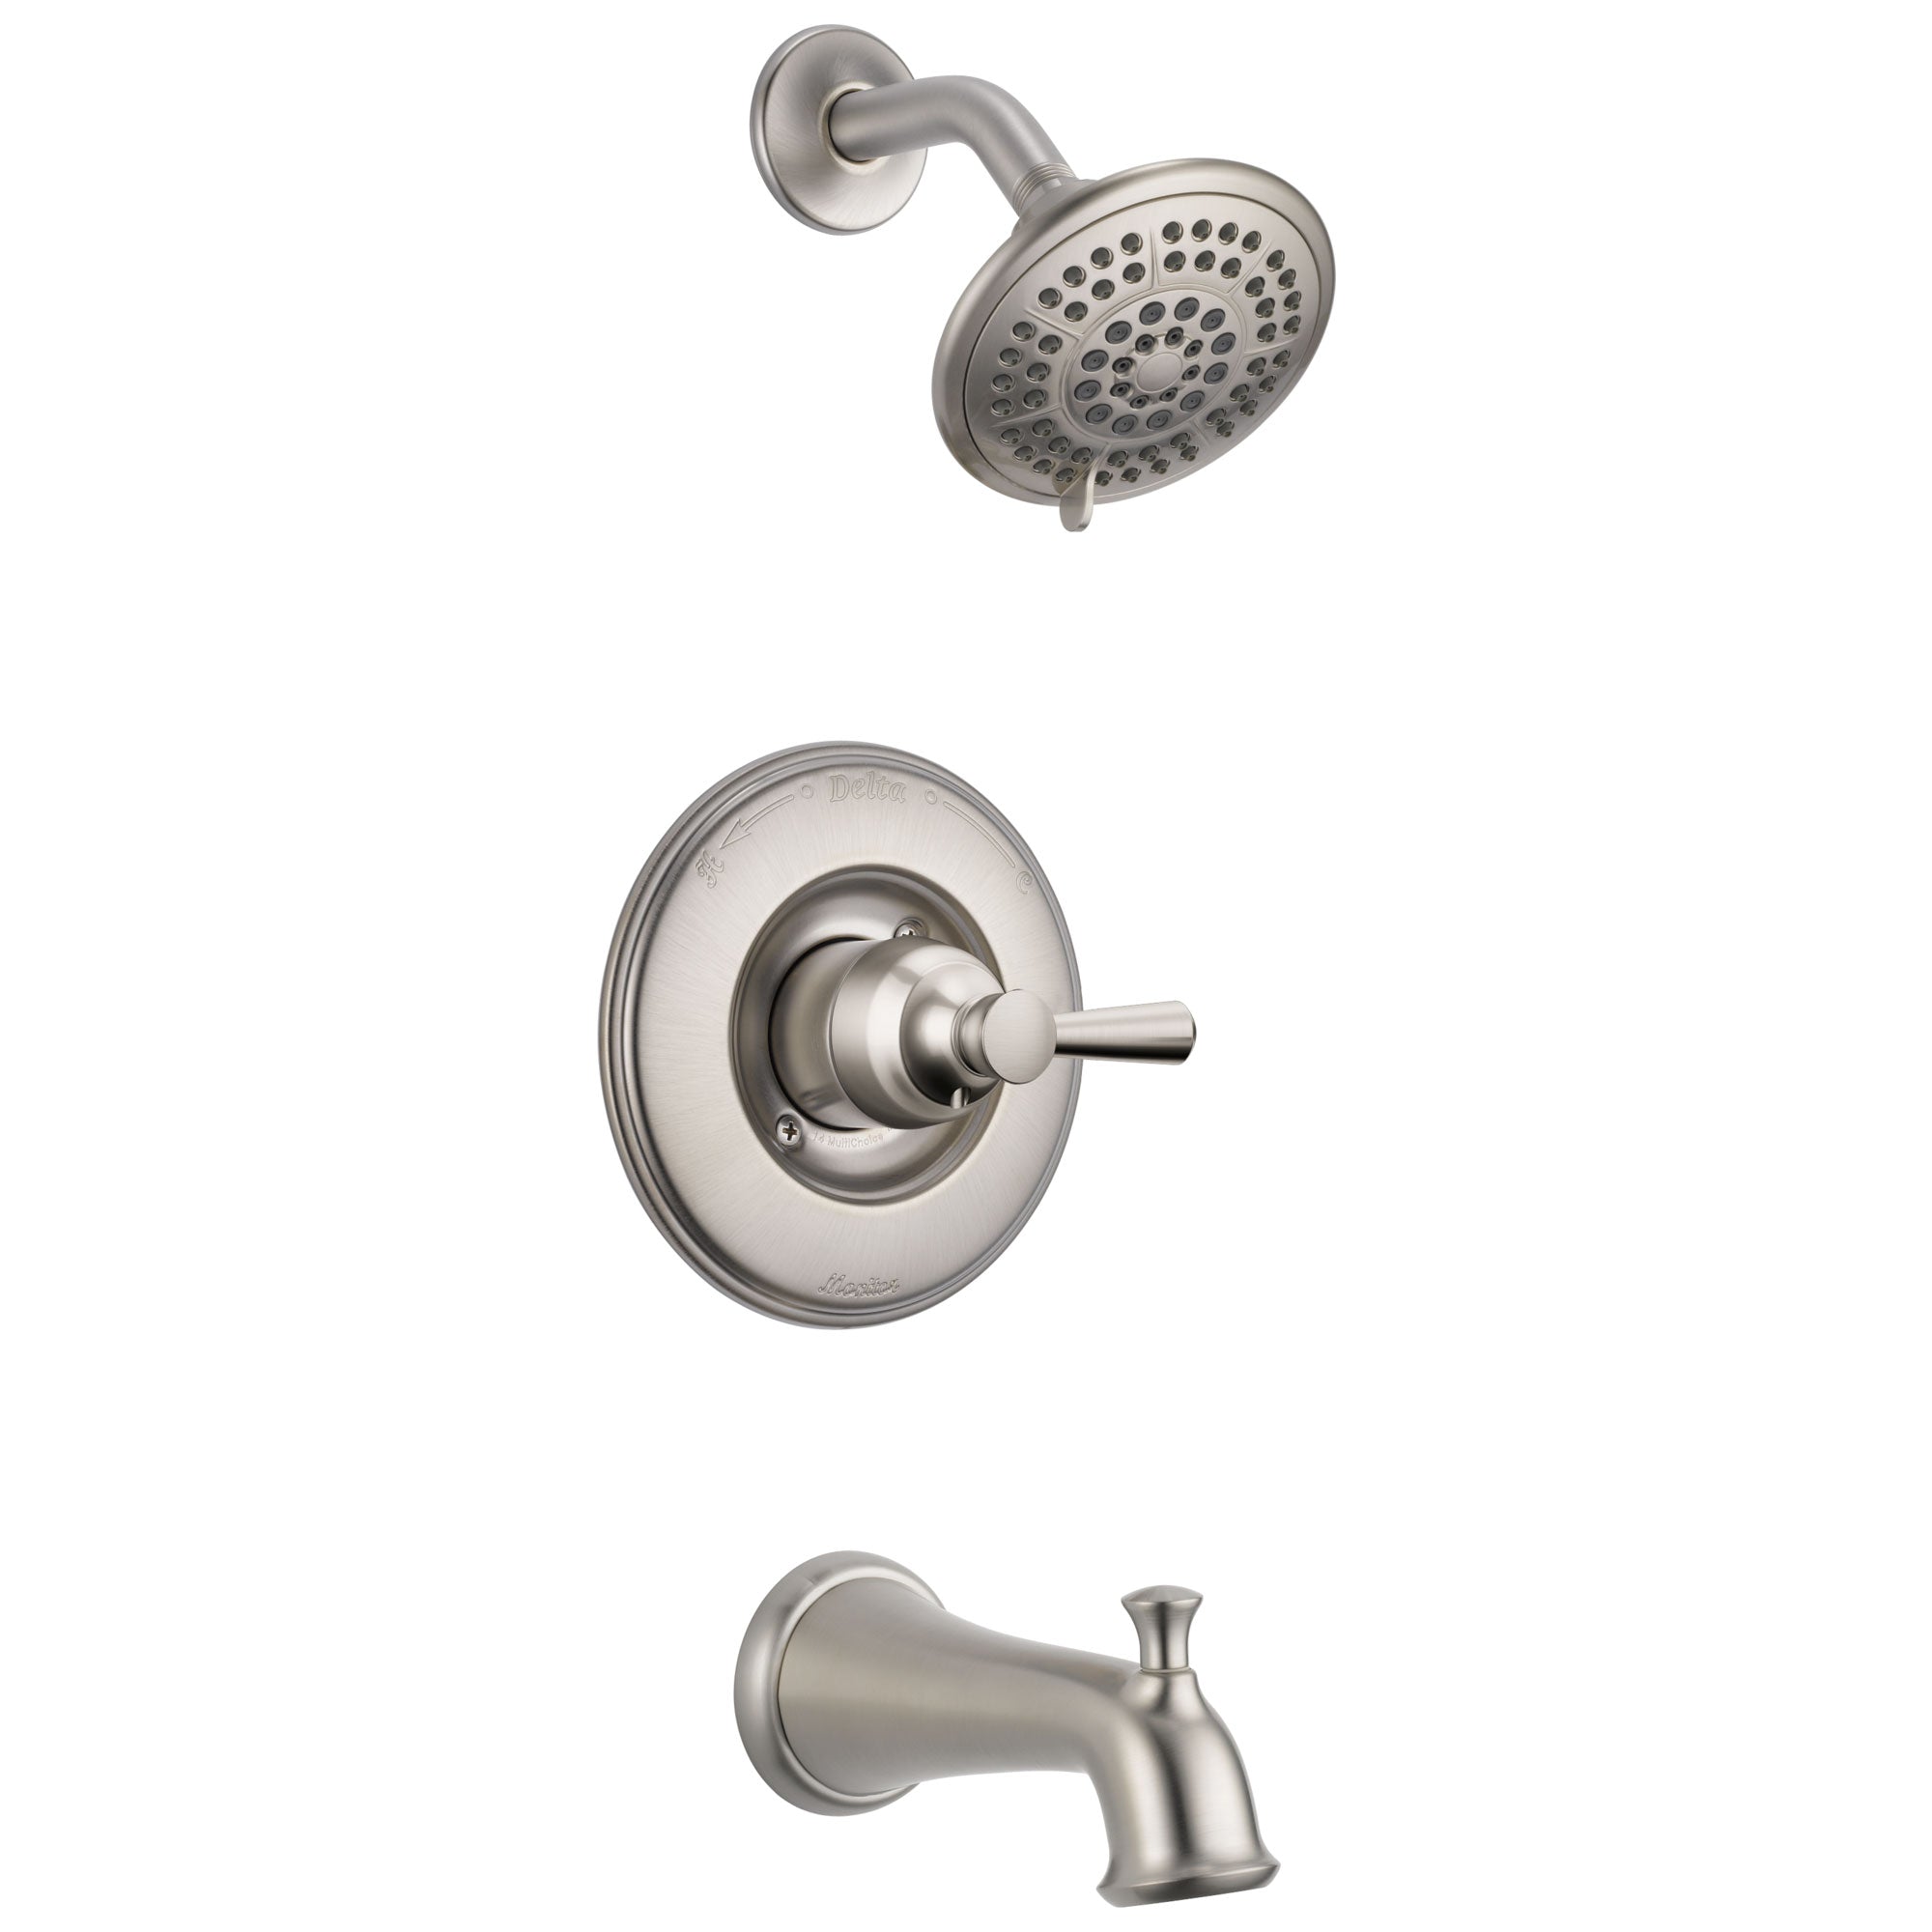 Delta Linden Collection Stainless Steel Finish Monitor 14 Contemporary Shower Faucet, Control, and Tub Spout Includes Trim Kit Rough Valve without Stops D2369V